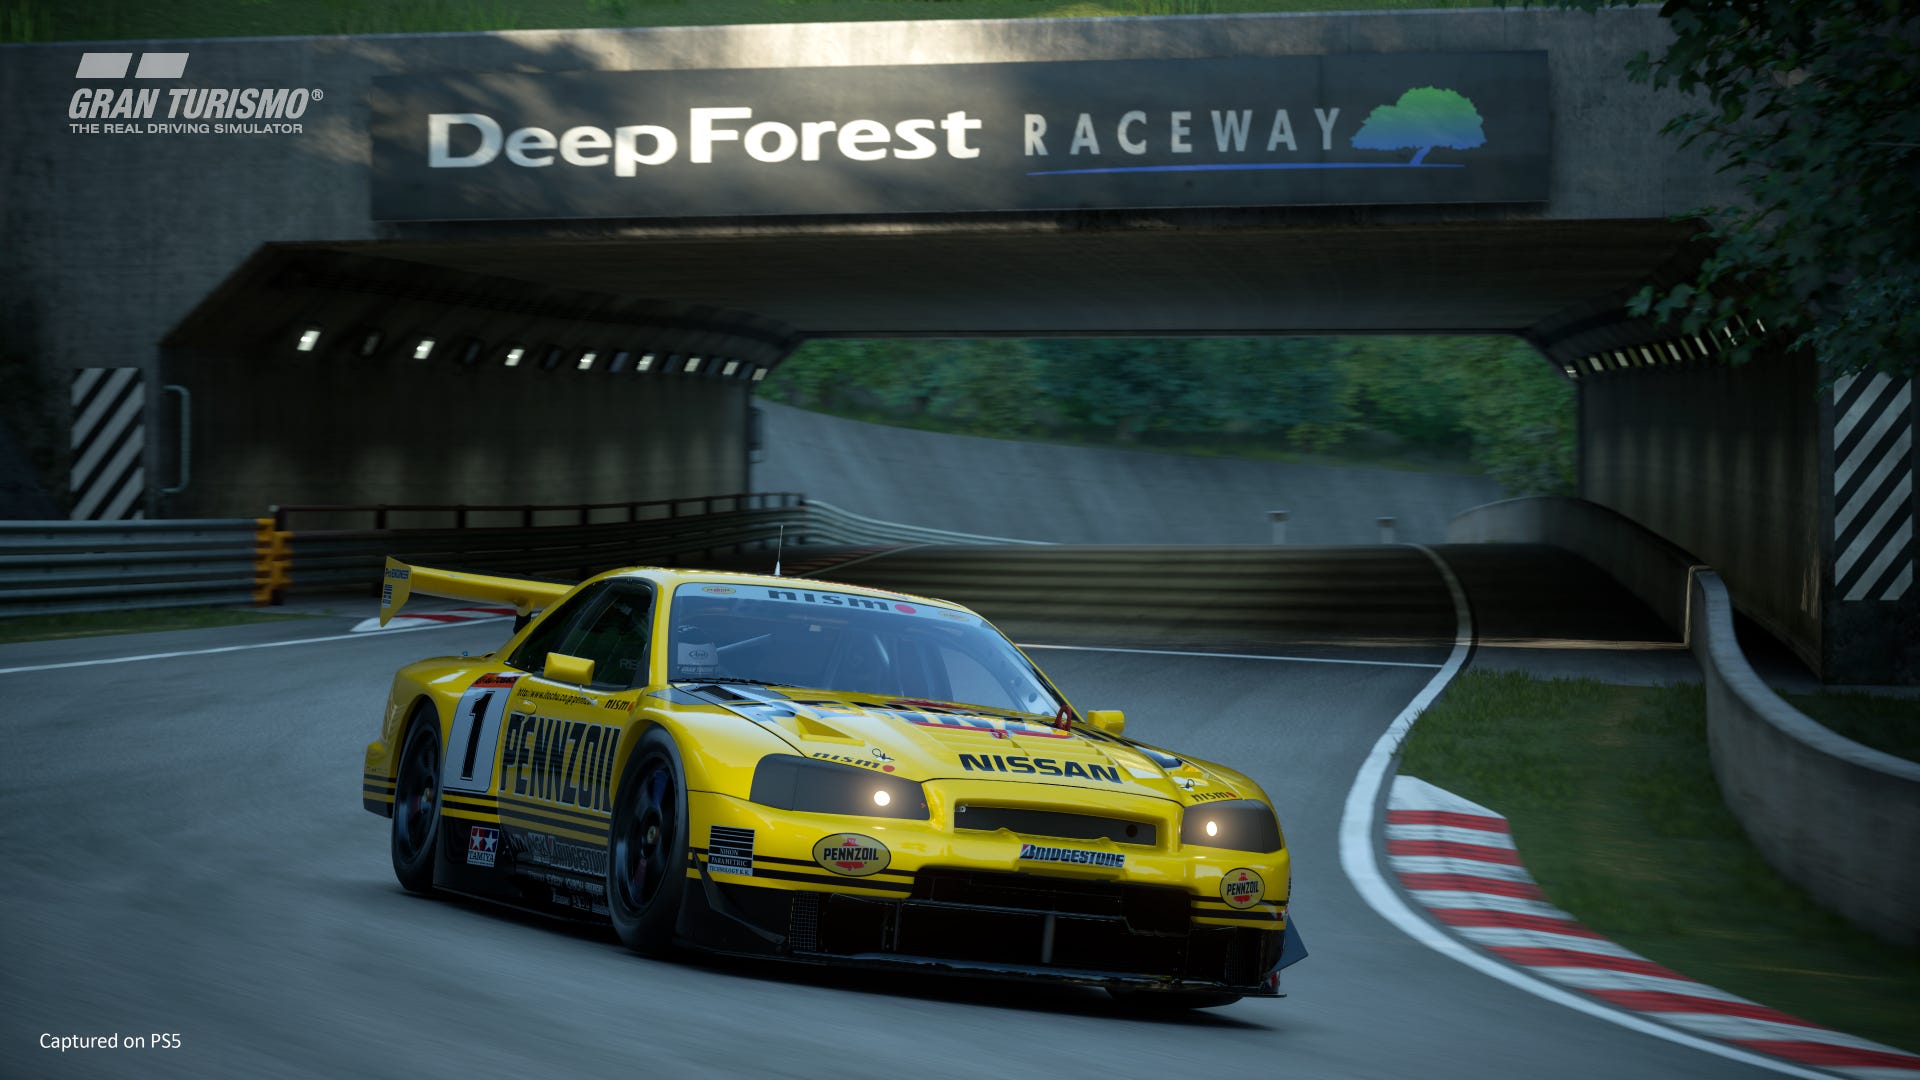 Get an early look at Gran Turismo 7 for PS5 - CNET